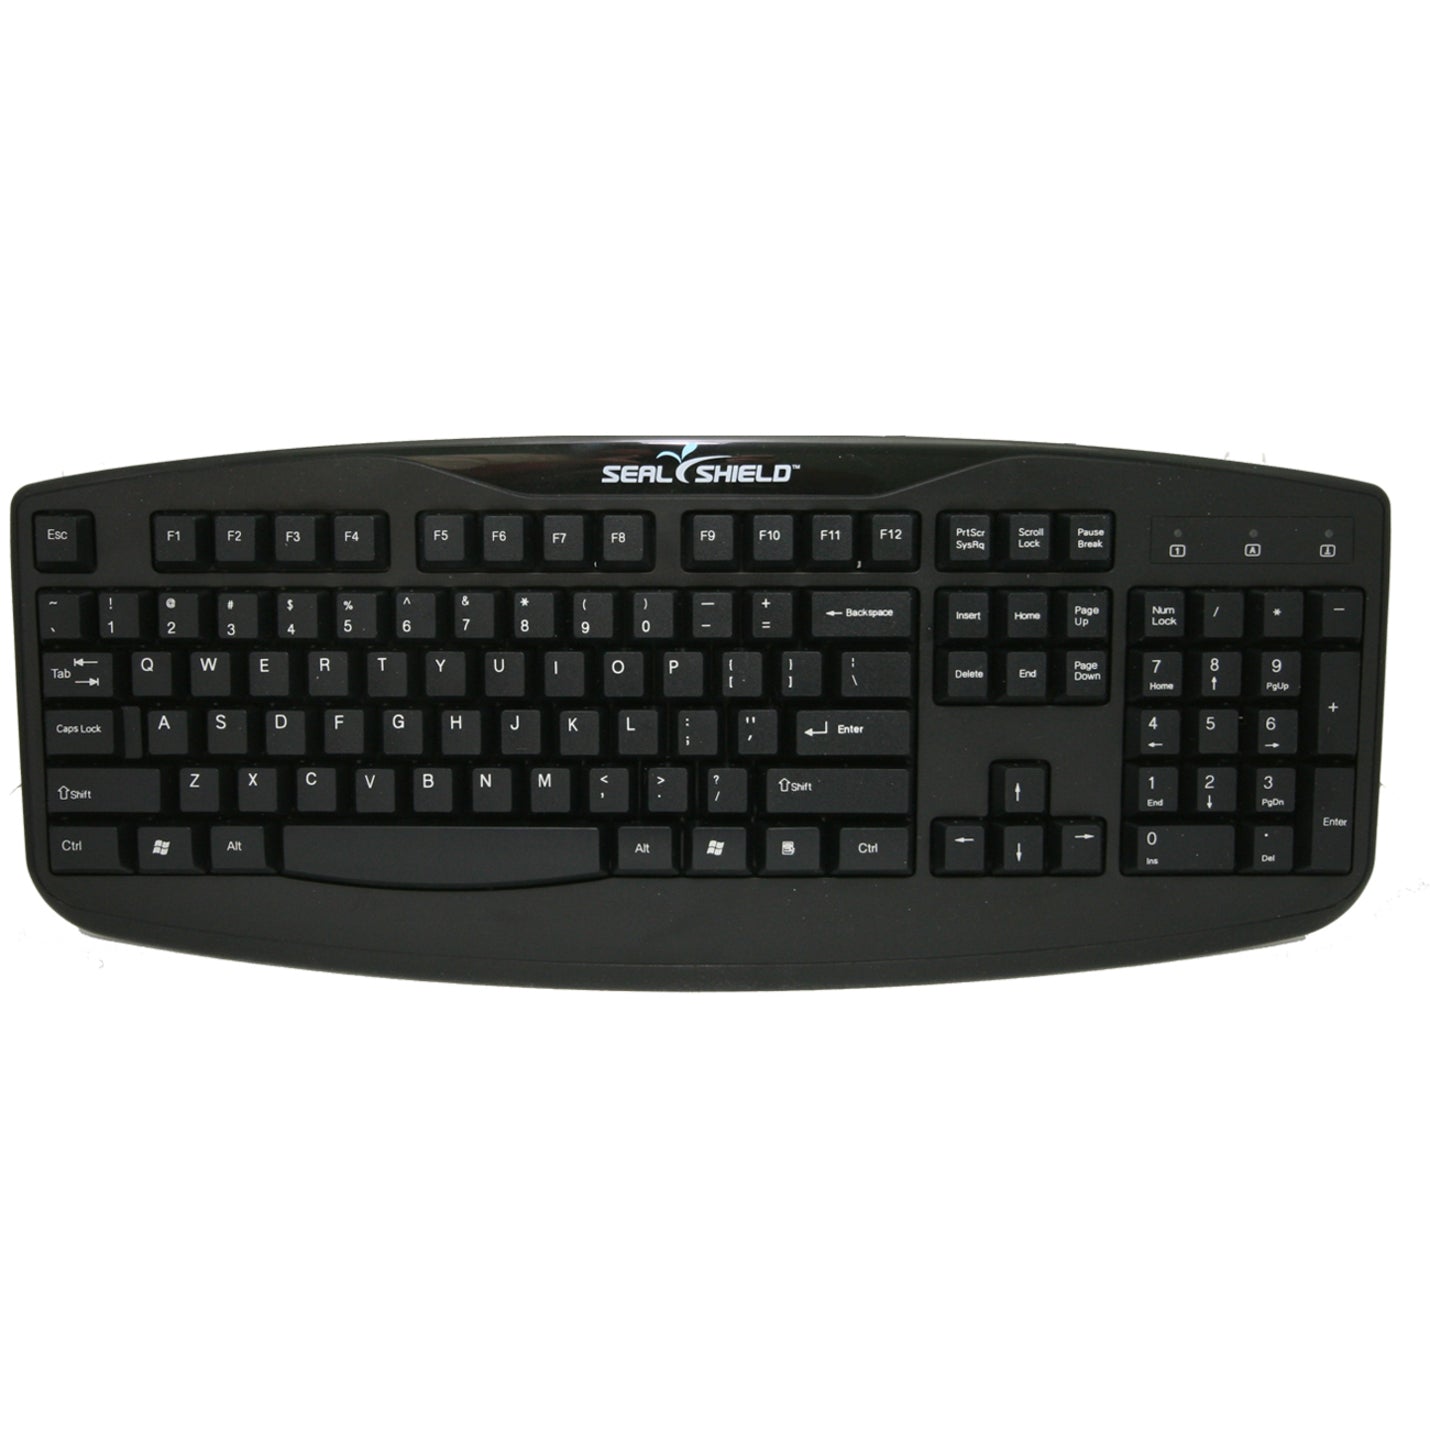 Seal Shield STK503 Keyboard, Spill Proof, Dust/Dirt-free, Water Proof, Washable, Anti-bacterial